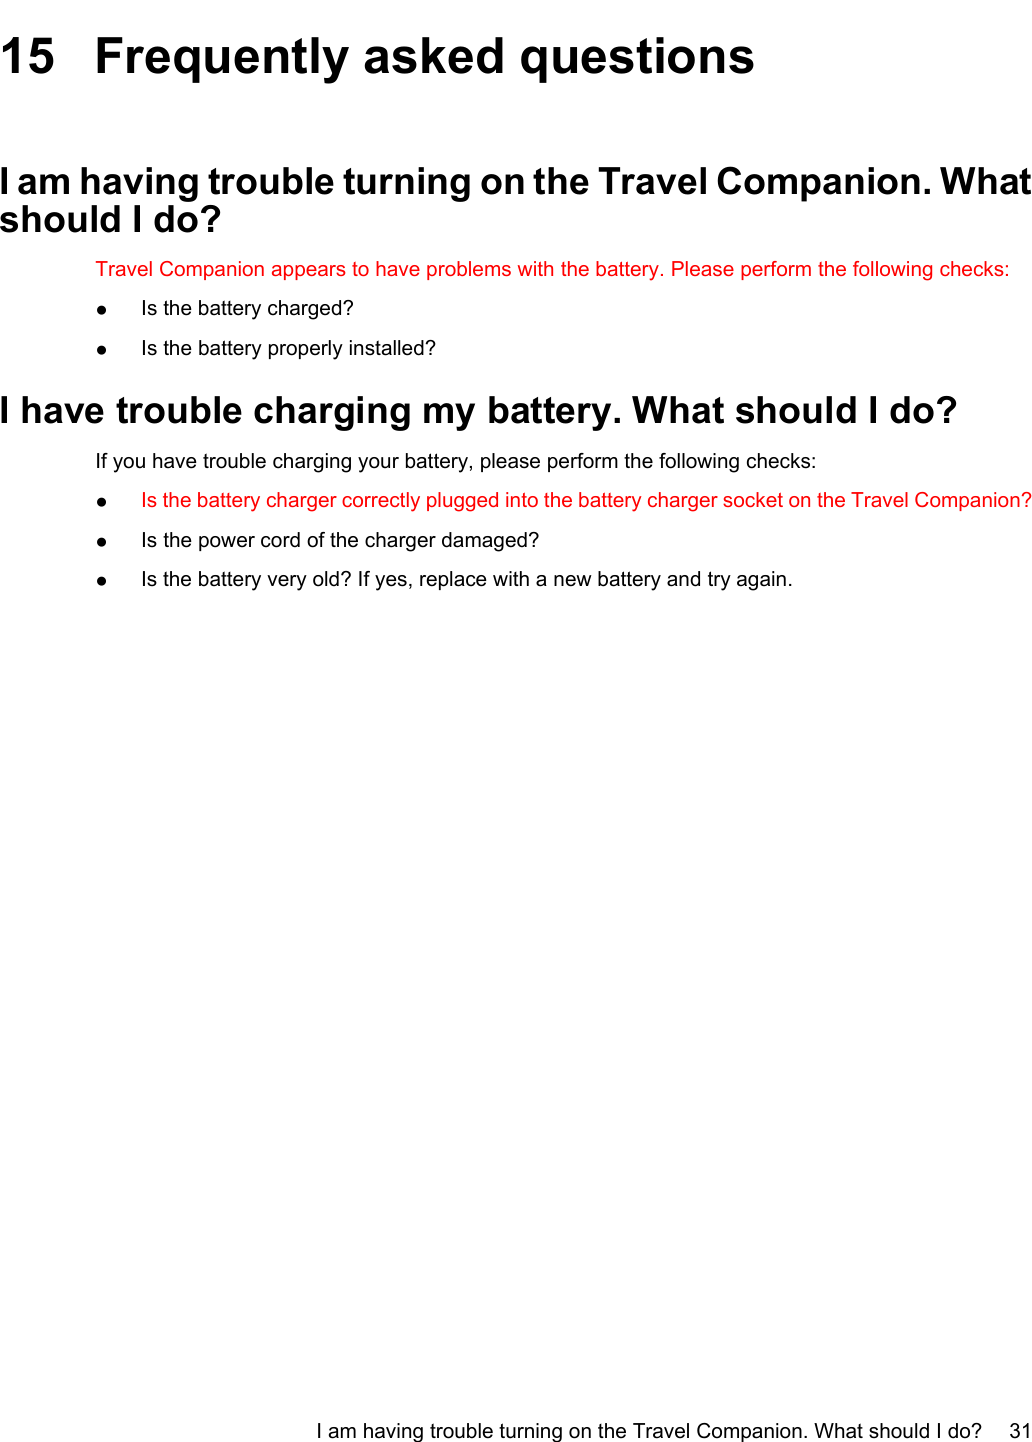 15 Frequently asked questionsI am having trouble turning on the Travel Companion. Whatshould I do?Travel Companion appears to have problems with the battery. Please perform the following checks:●Is the battery charged?●Is the battery properly installed?I have trouble charging my battery. What should I do?If you have trouble charging your battery, please perform the following checks:●Is the battery charger correctly plugged into the battery charger socket on the Travel Companion?●Is the power cord of the charger damaged?●Is the battery very old? If yes, replace with a new battery and try again.I am having trouble turning on the Travel Companion. What should I do? 31